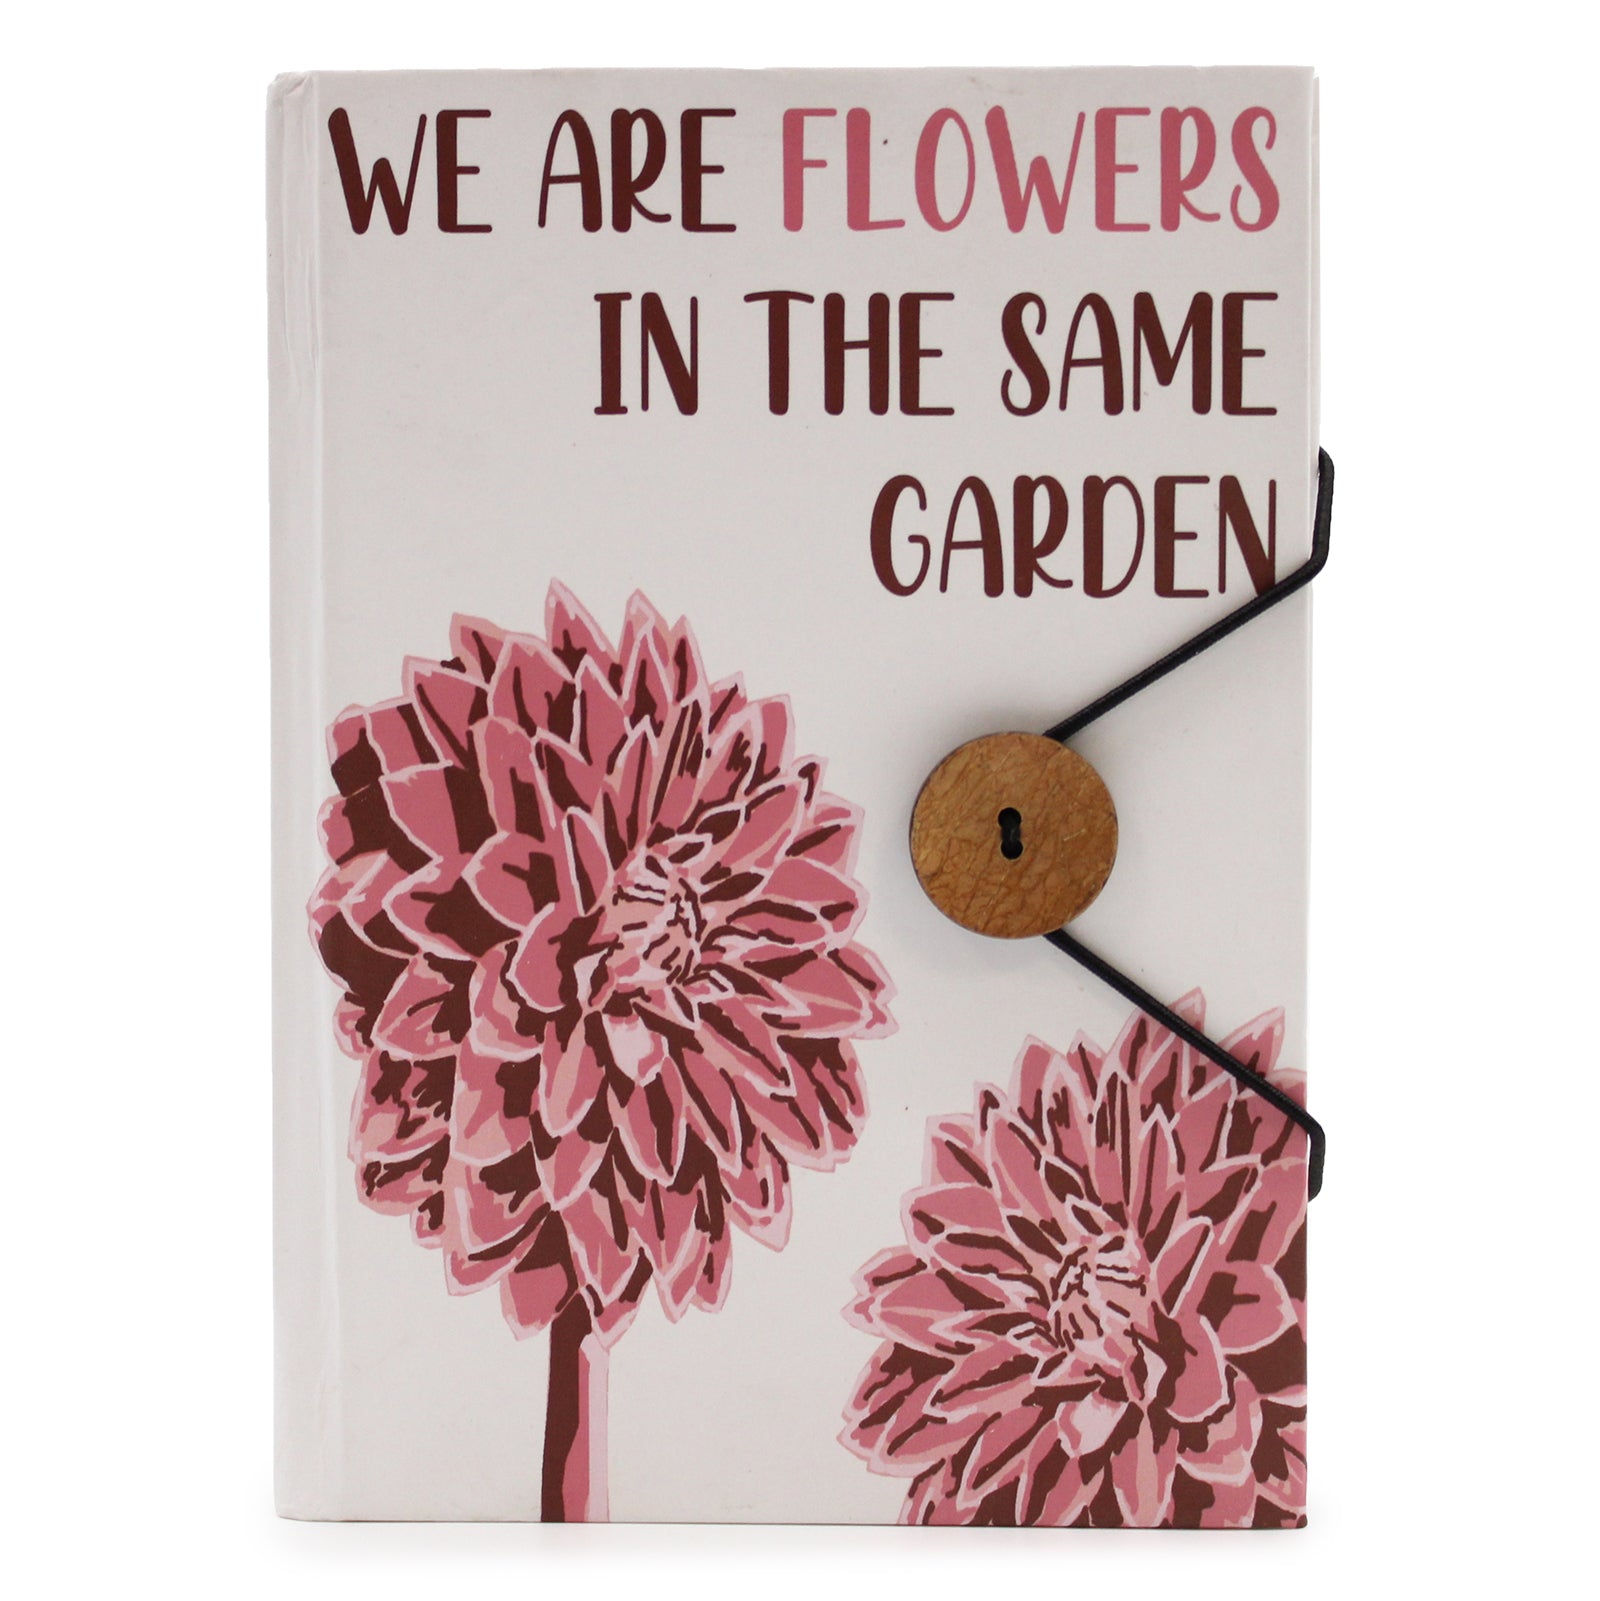 View Notebook with strap Flowers in the same garden information